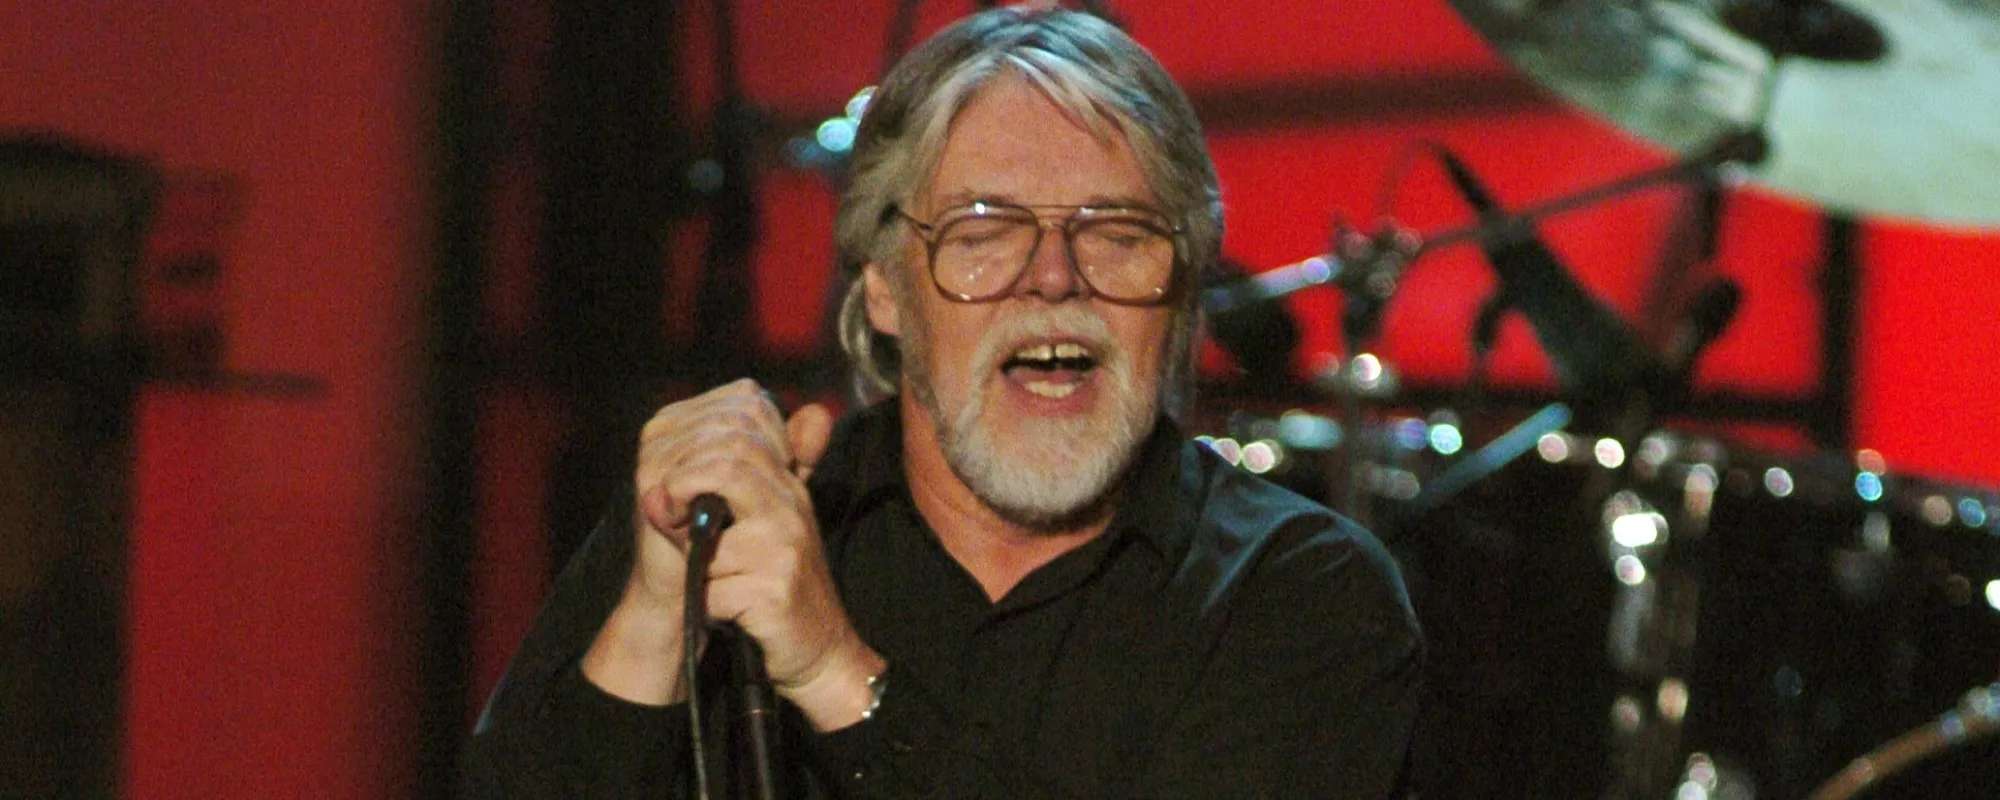 Old Time Rock ‘n’ Roller: 5 Classic Covers in Tribute of Bob Seger